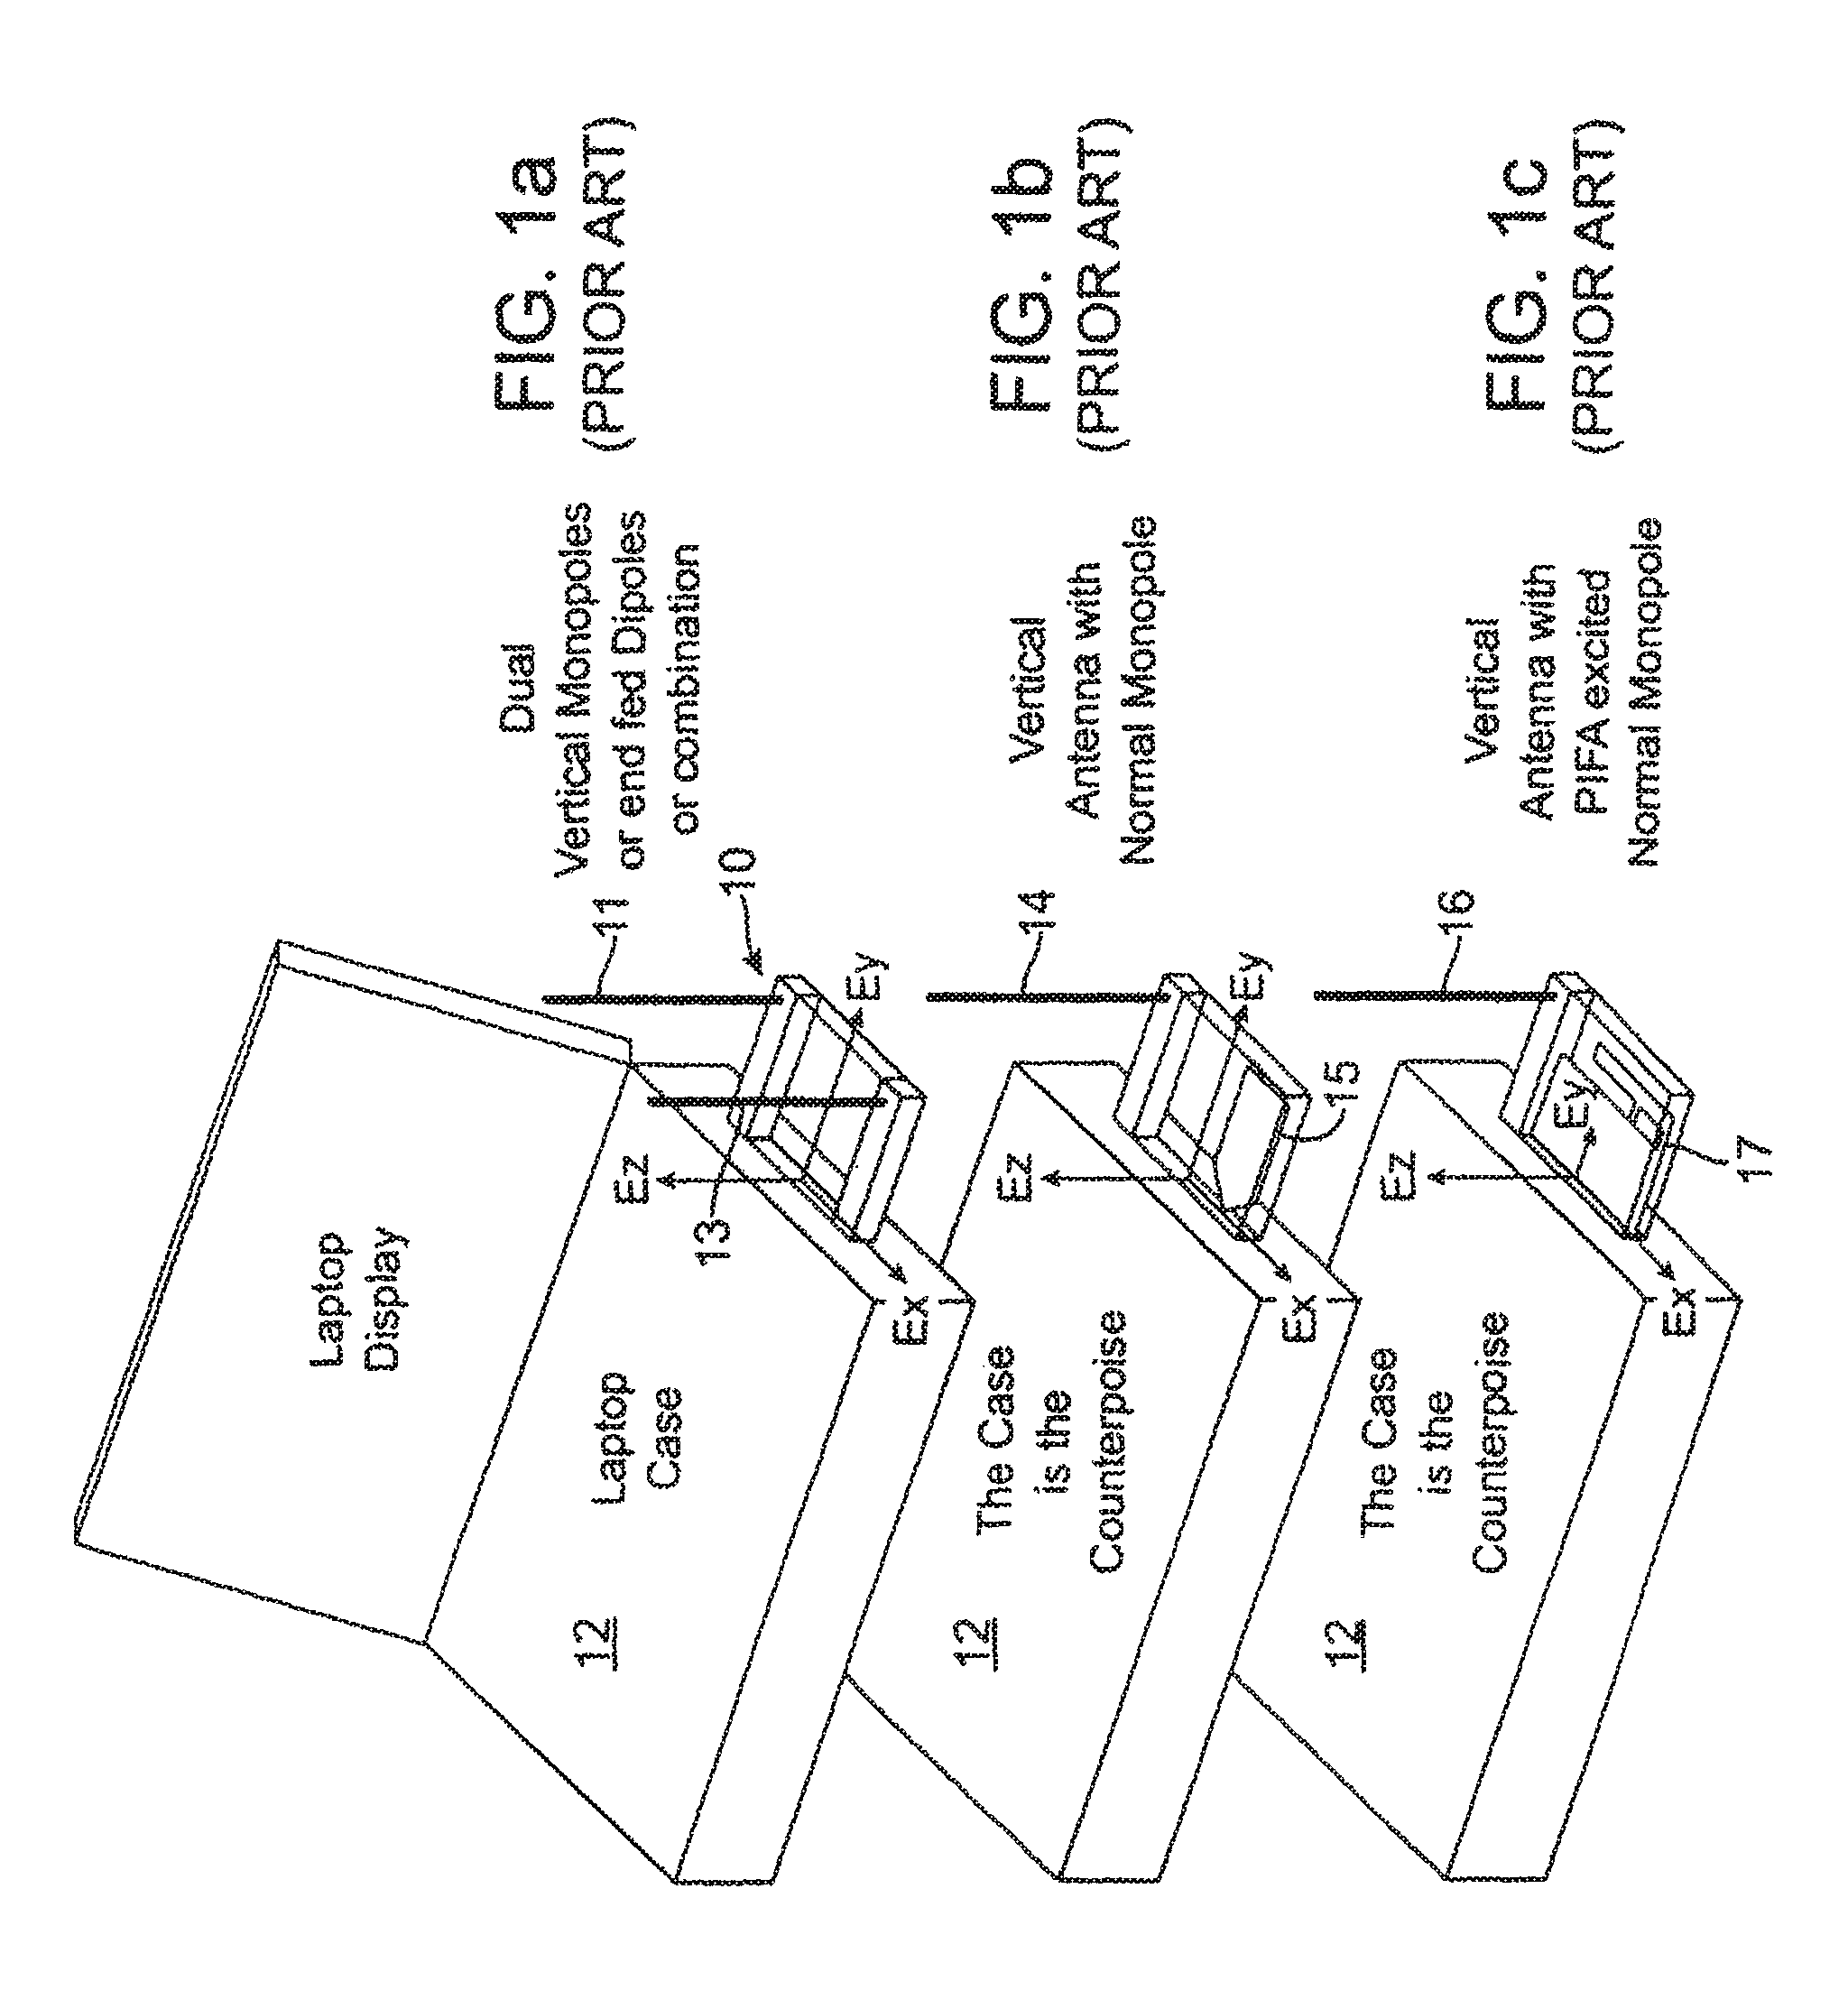 Antenna configurations for compact device wireless communication